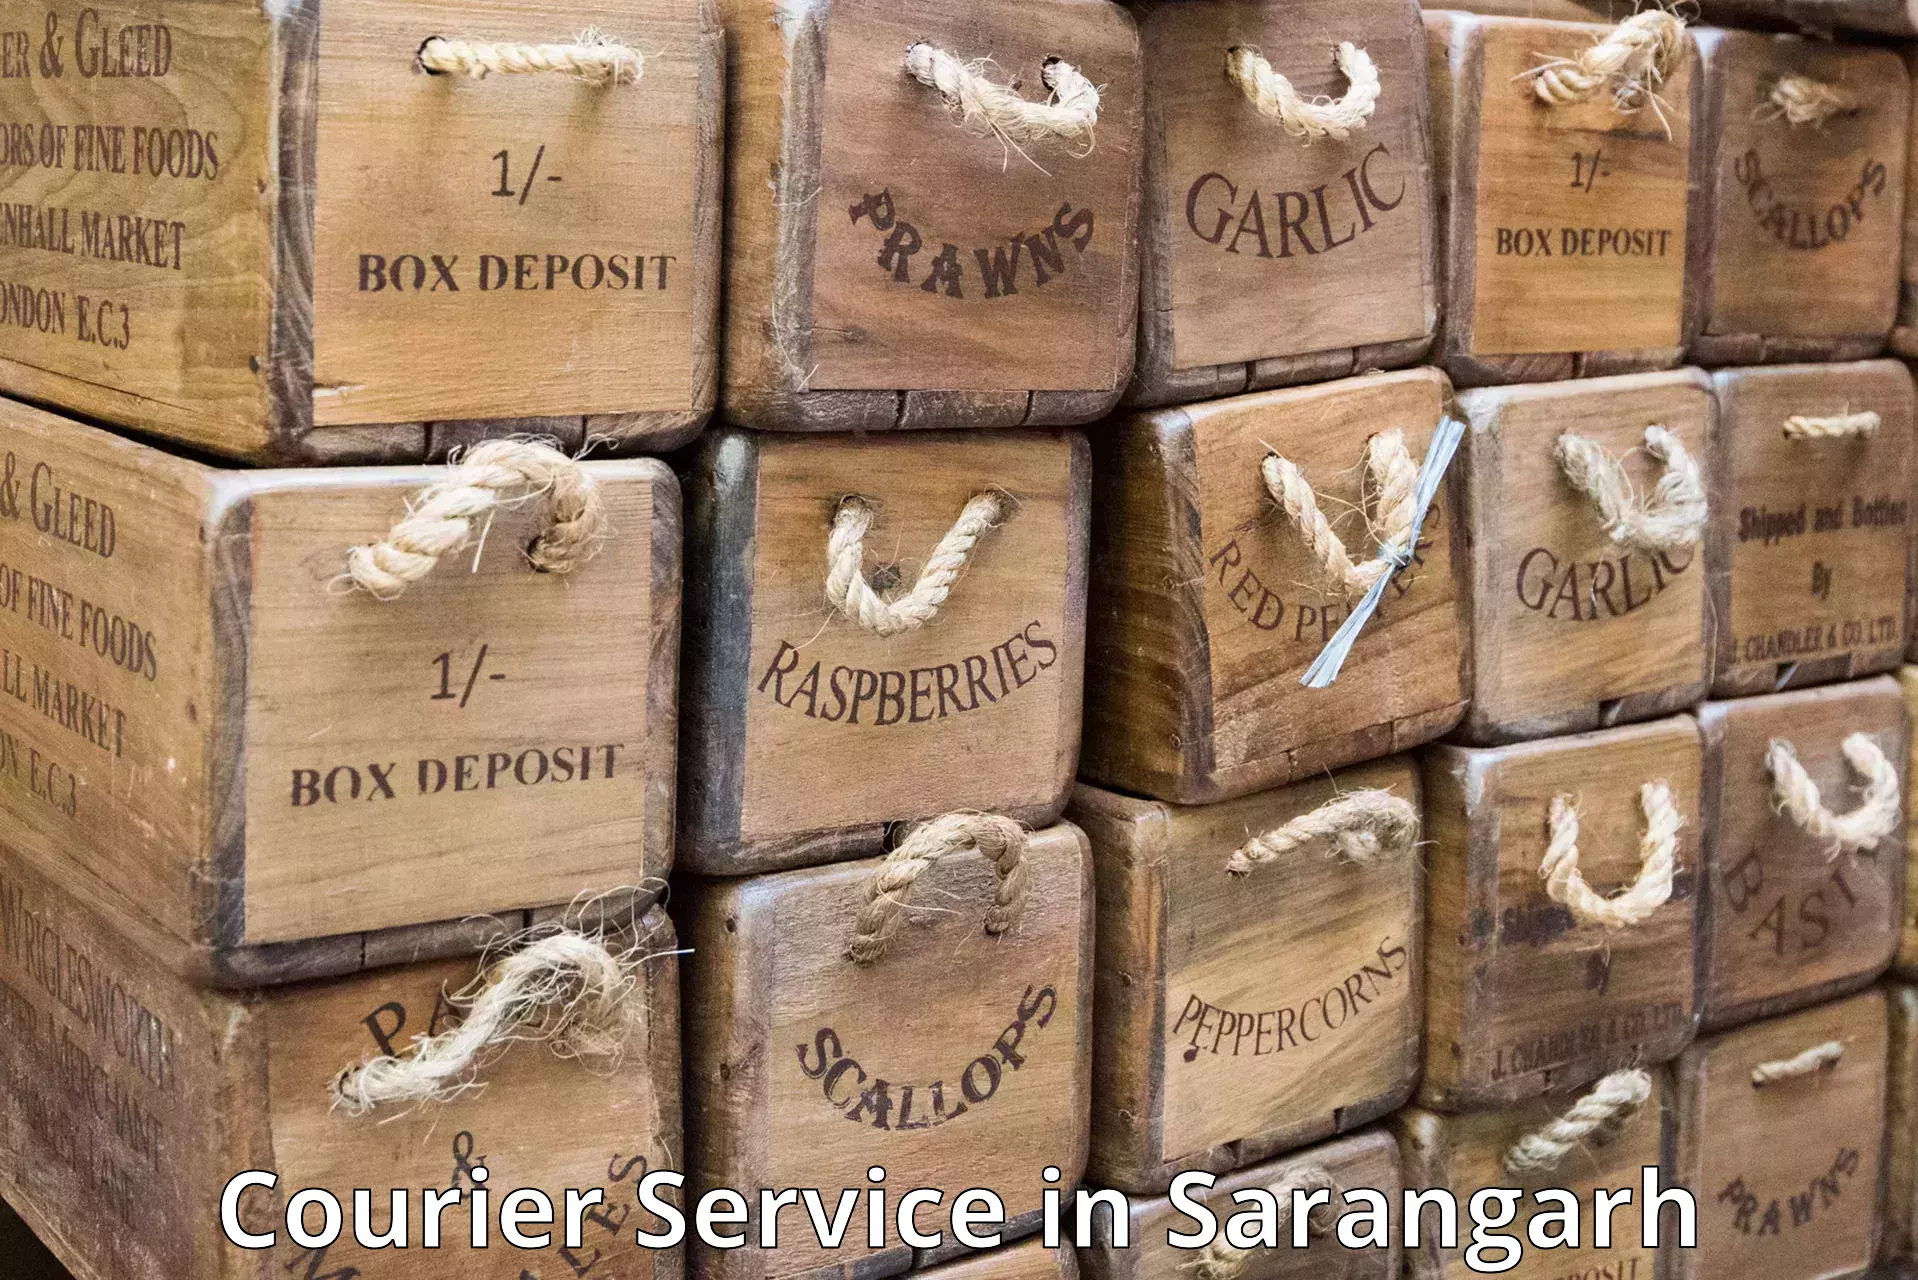 Global delivery options in Sarangarh